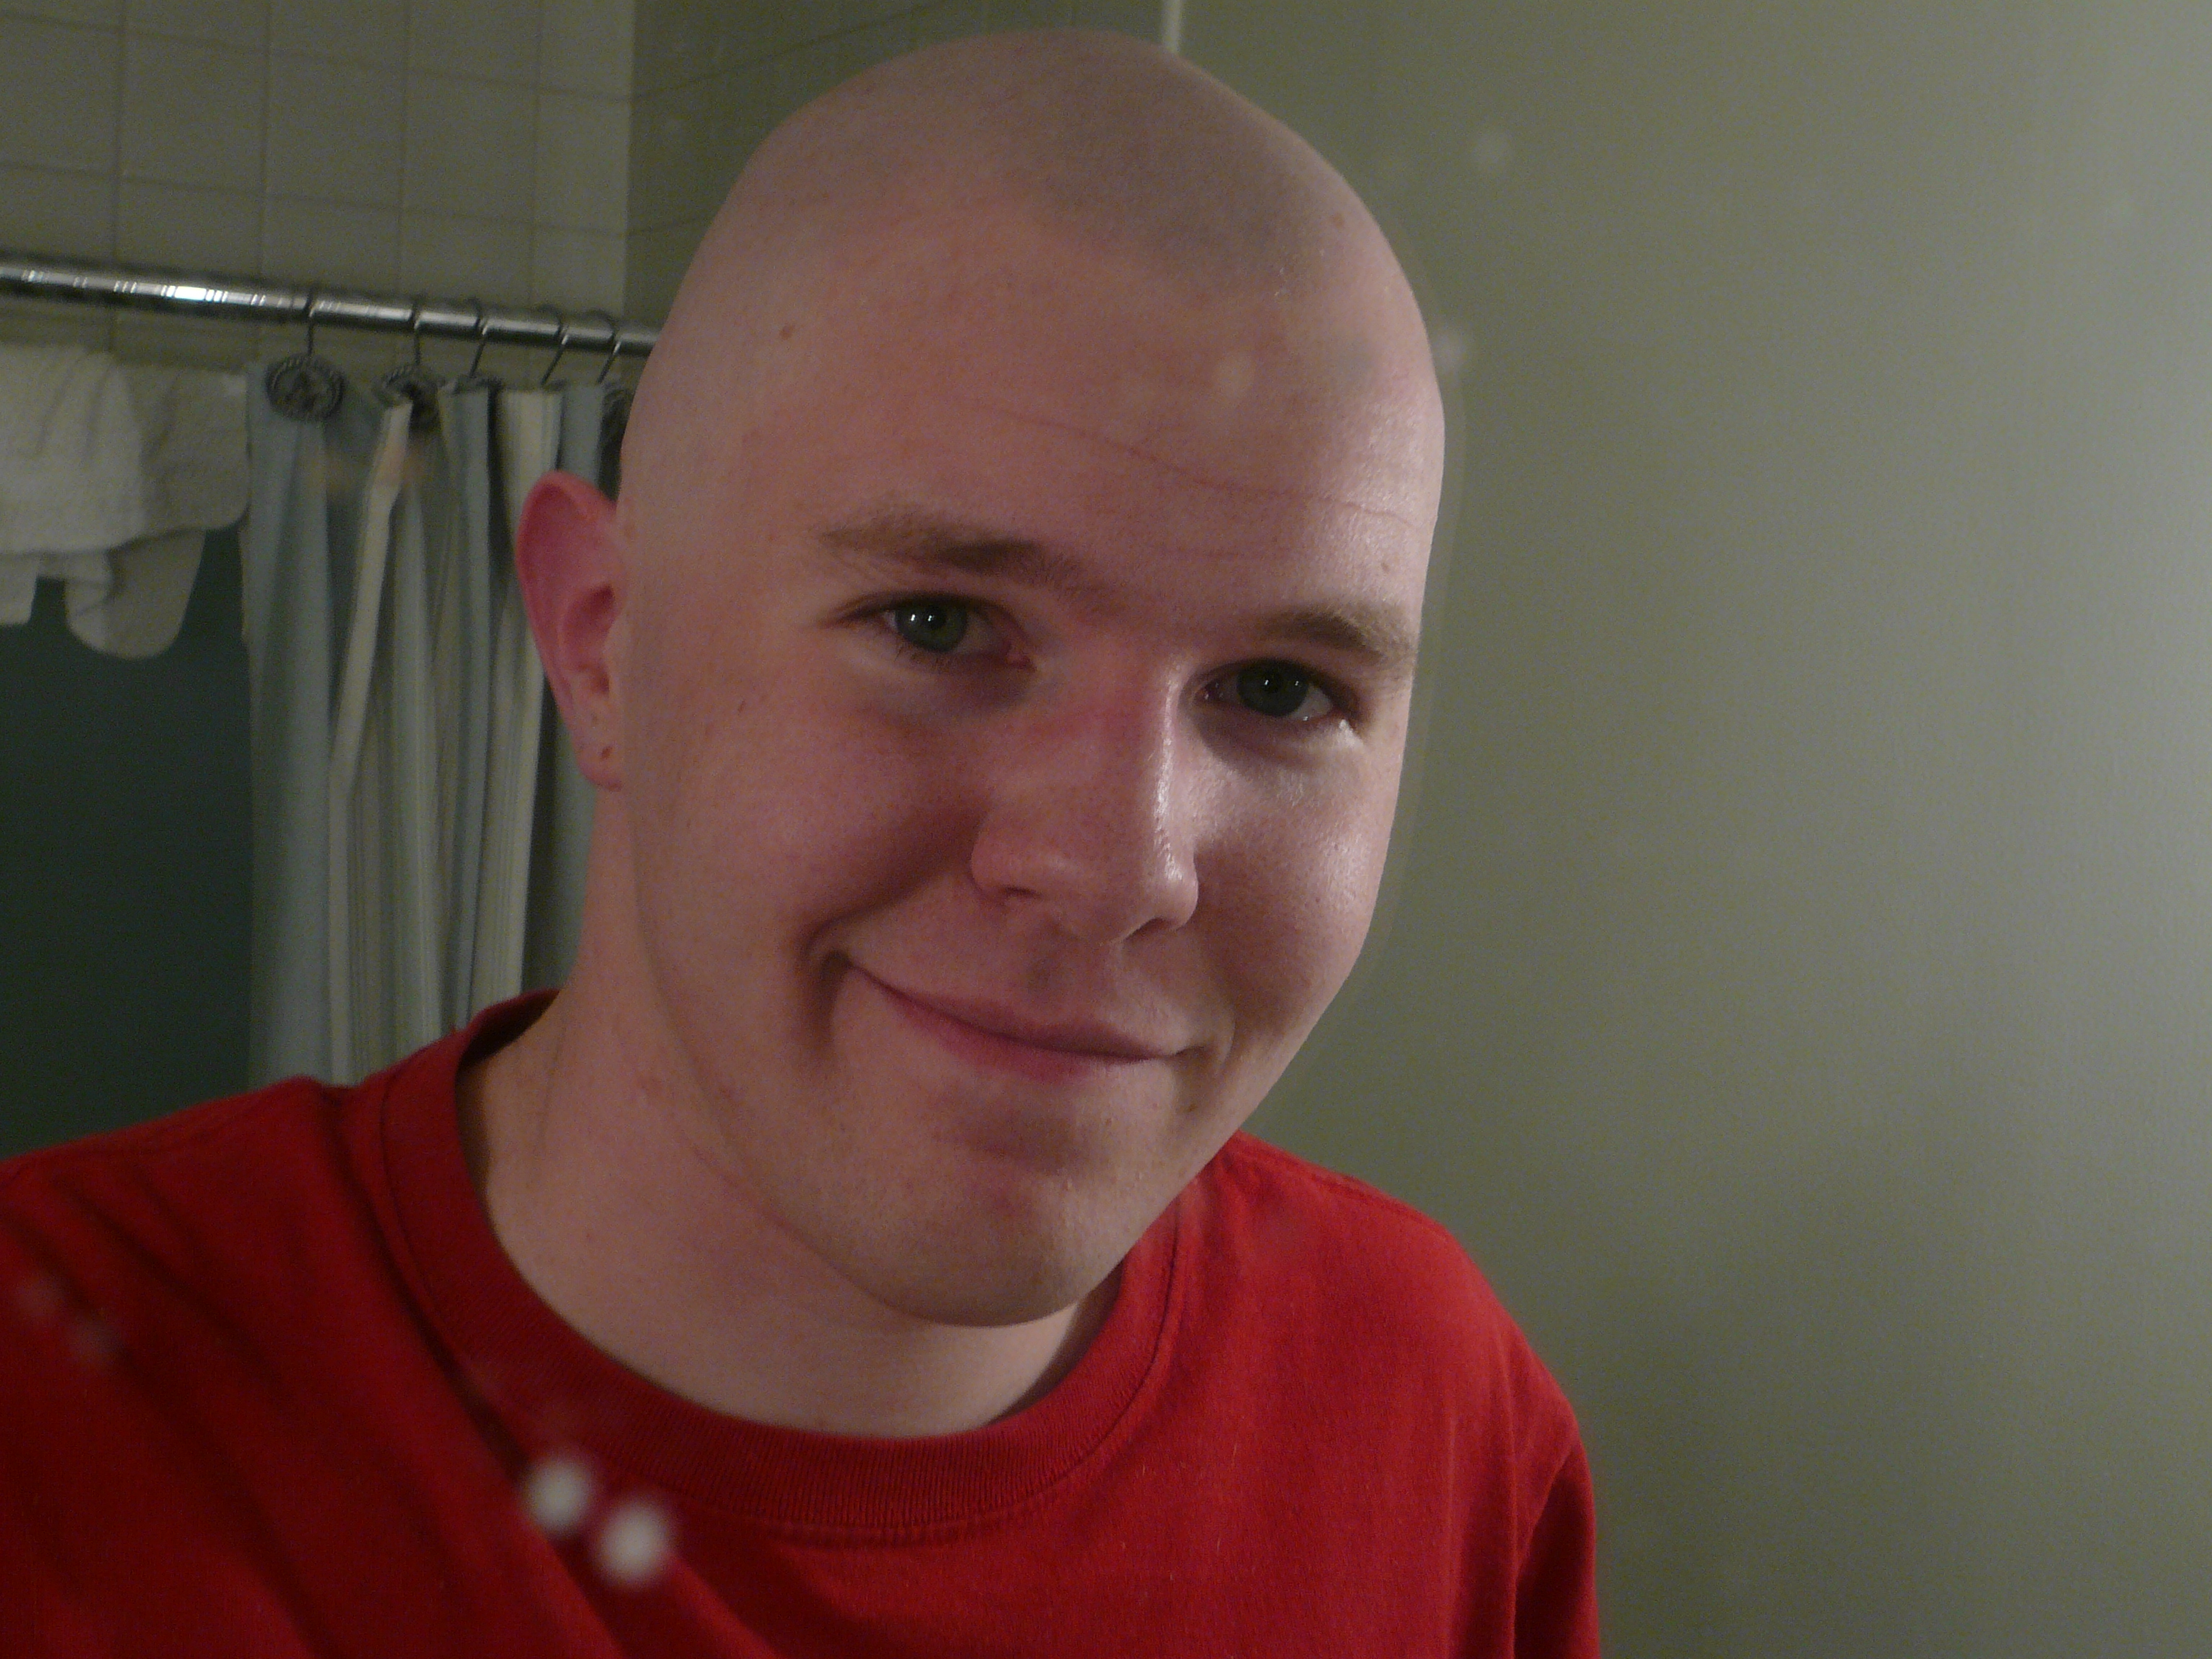 A Shaved Head 15